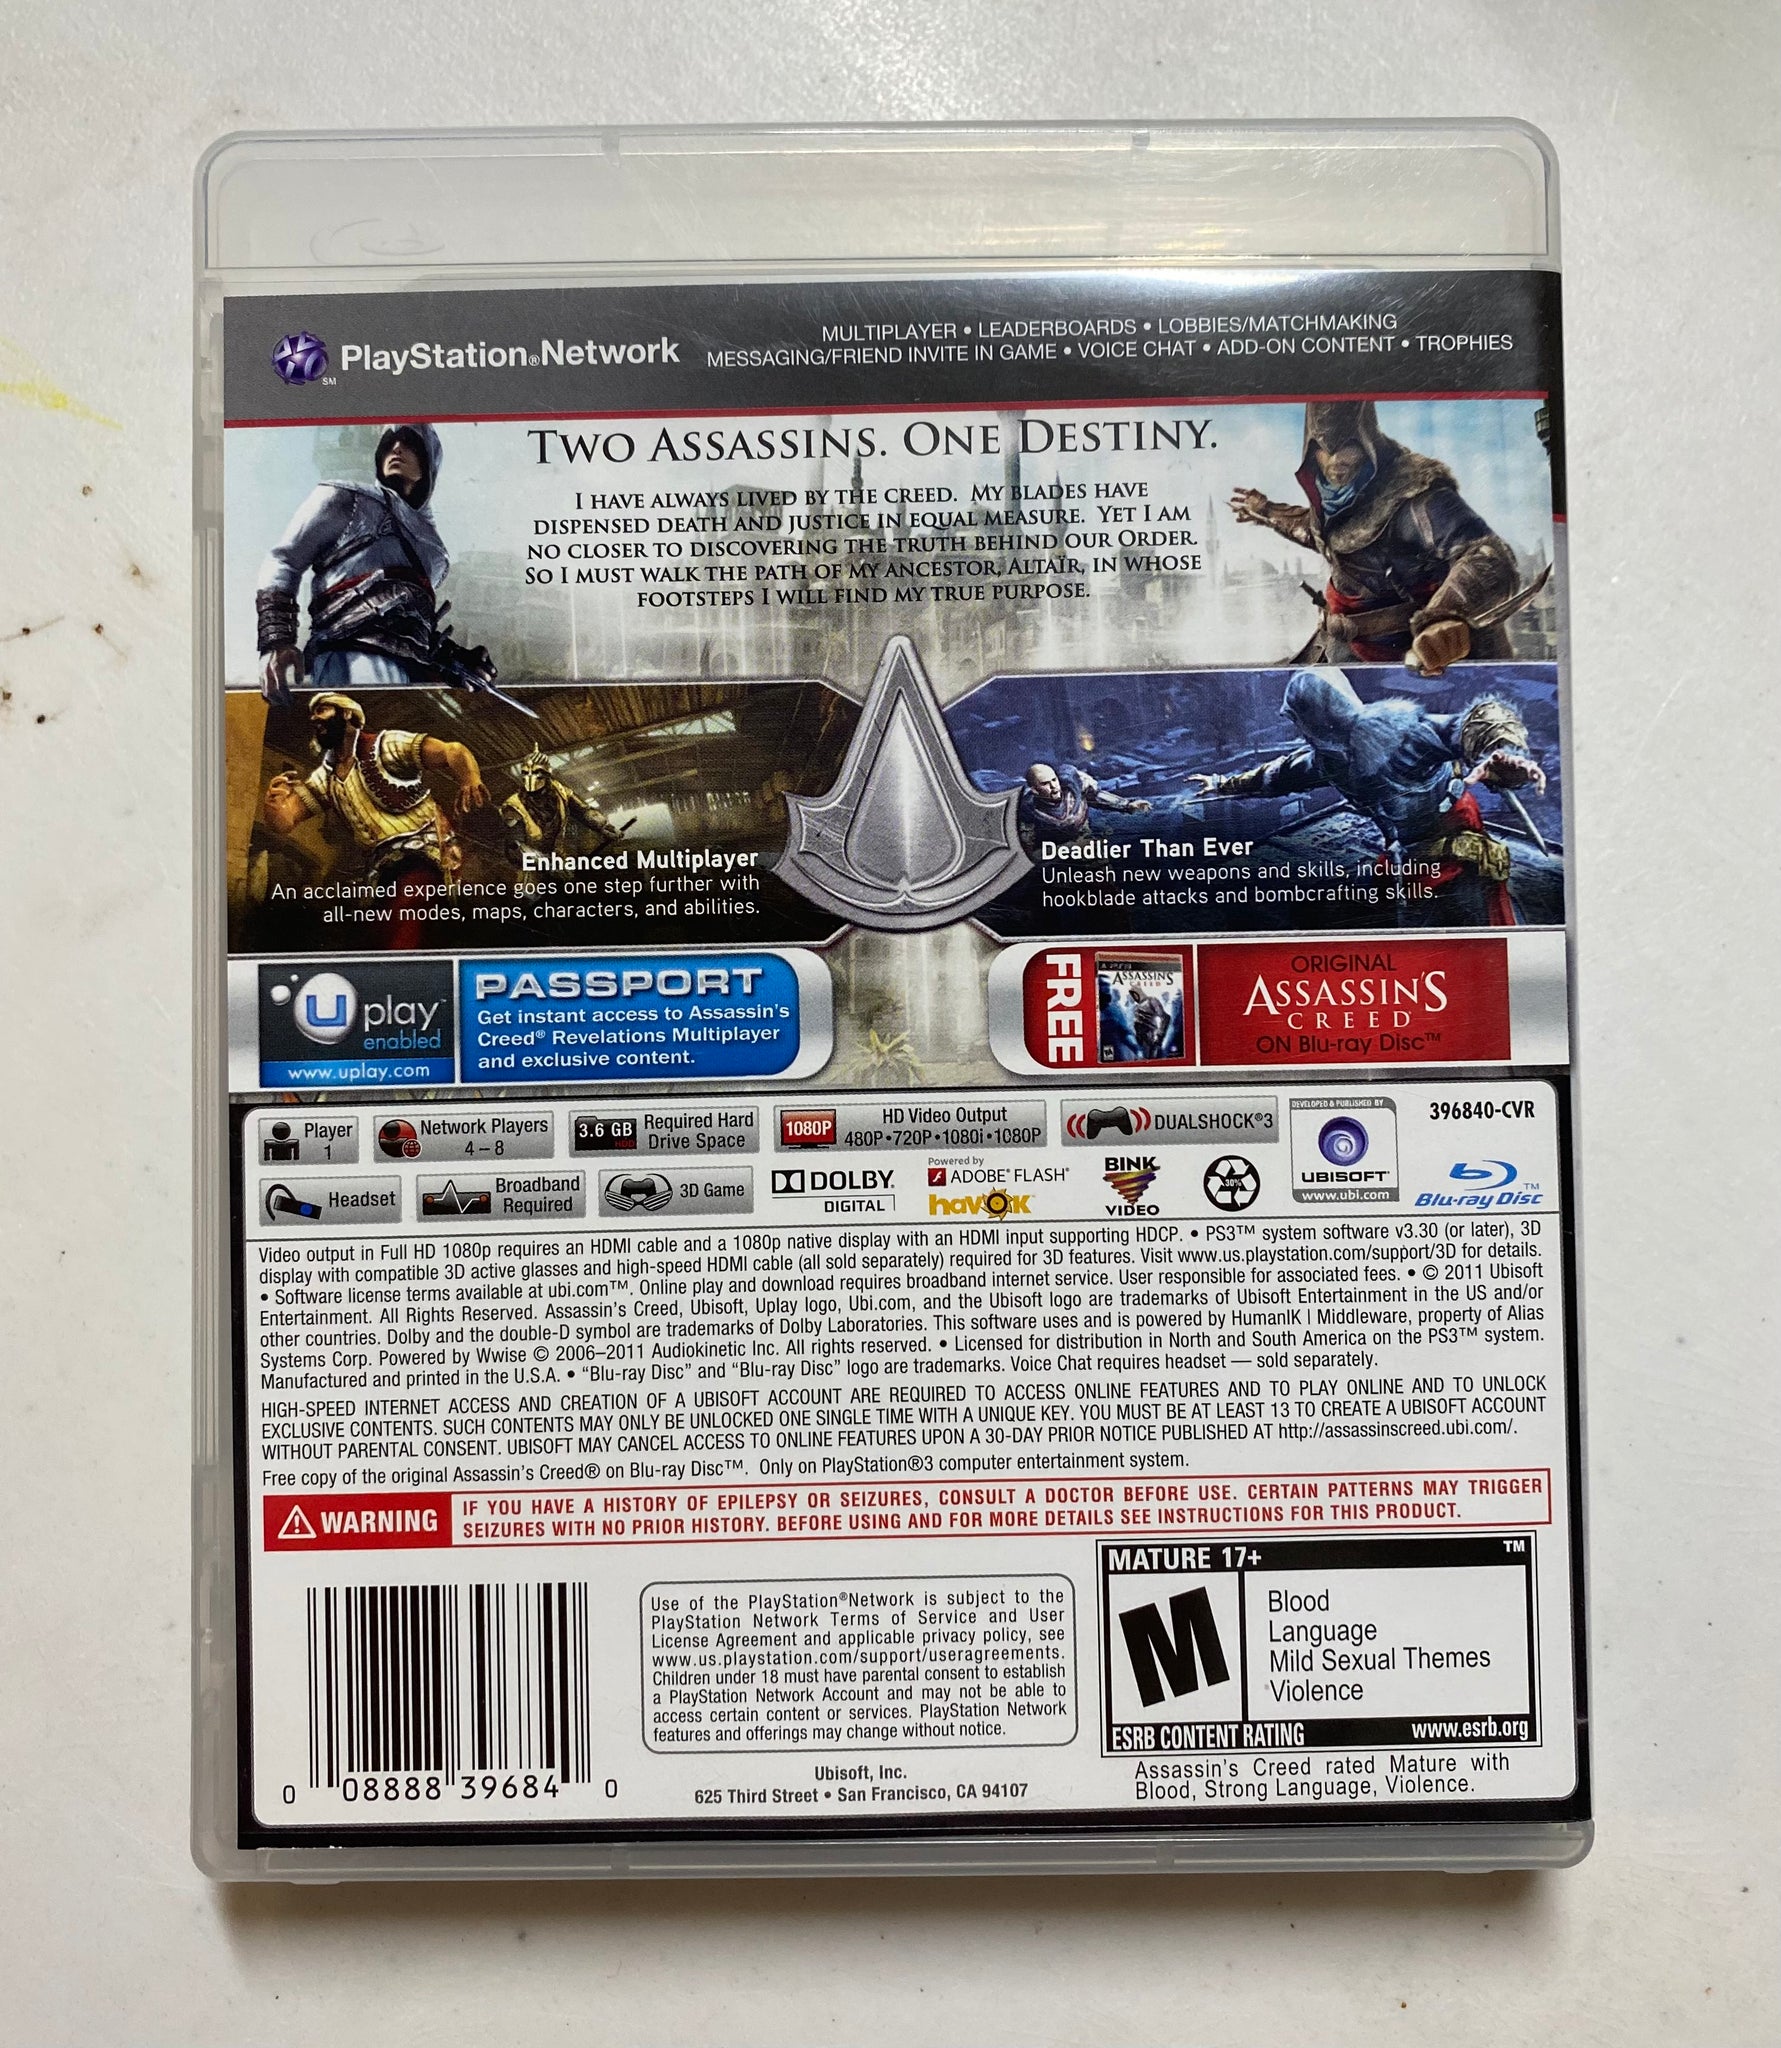 Assassin's Creed III Remastered Signature Edition - Assassin's Collection